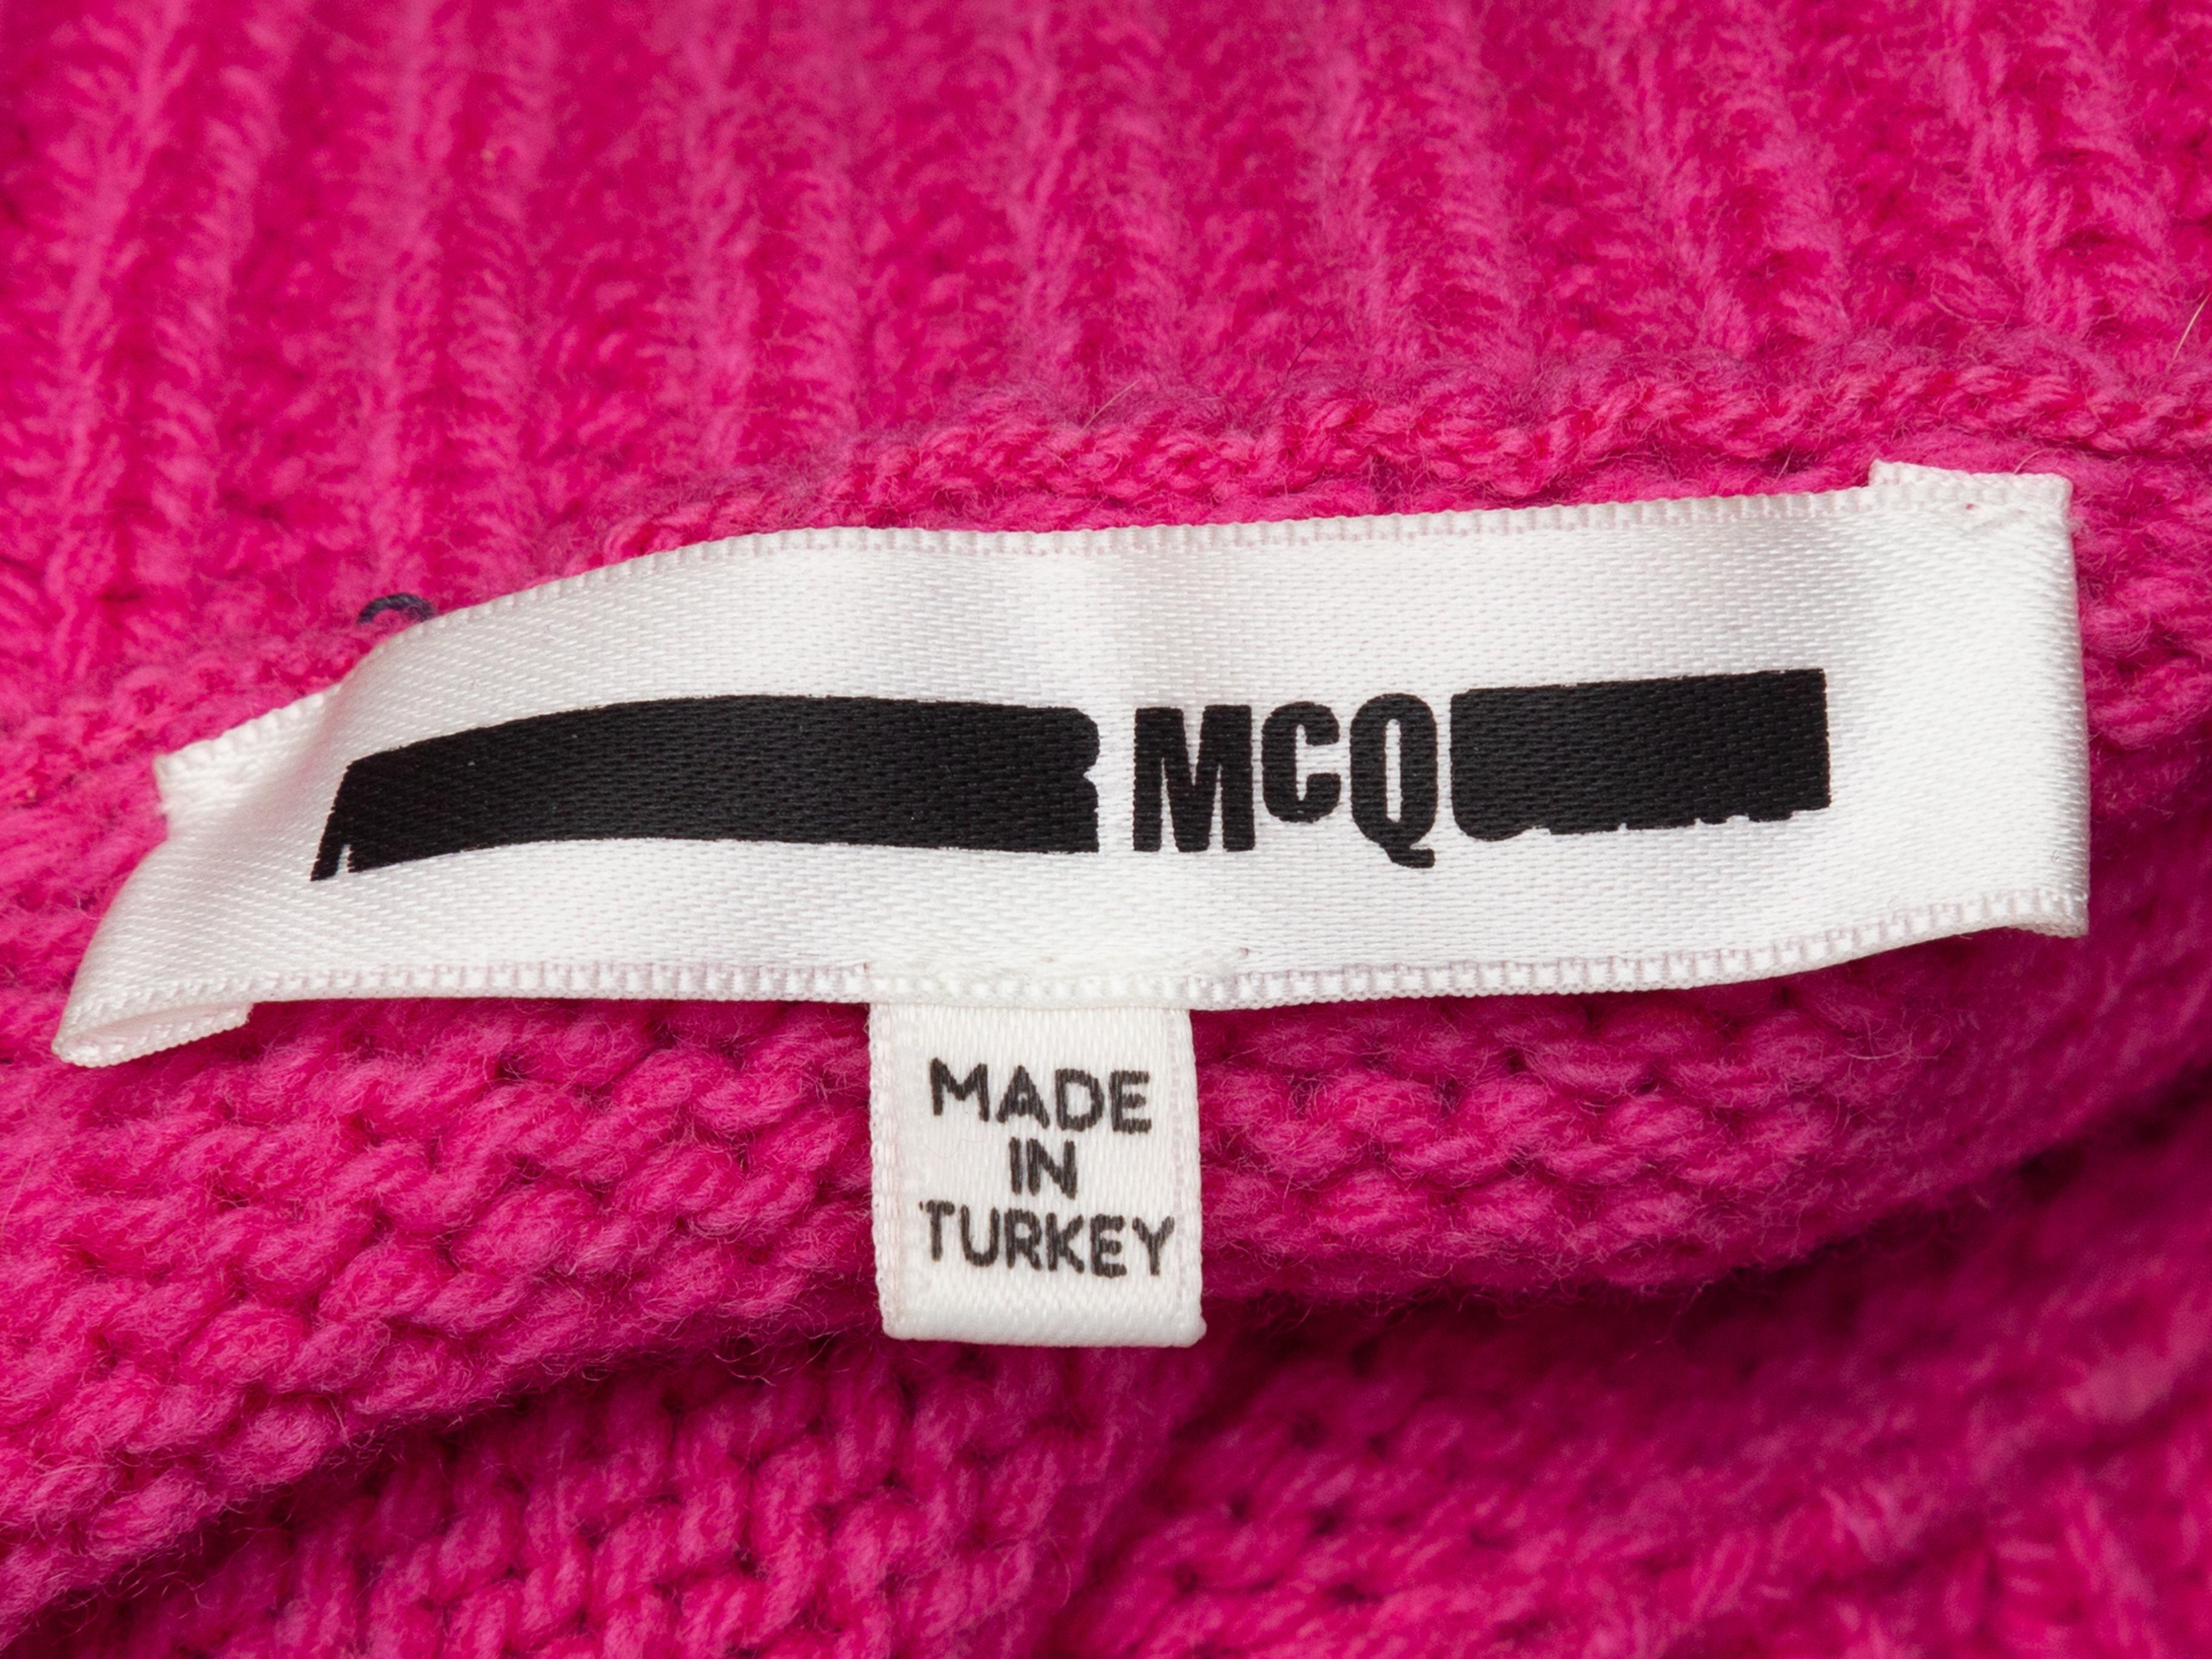 Product details: Hot pink turtleneck sweater by McQ Alexander McQueen. Lace-up detailing at sides and at cuffs. 39